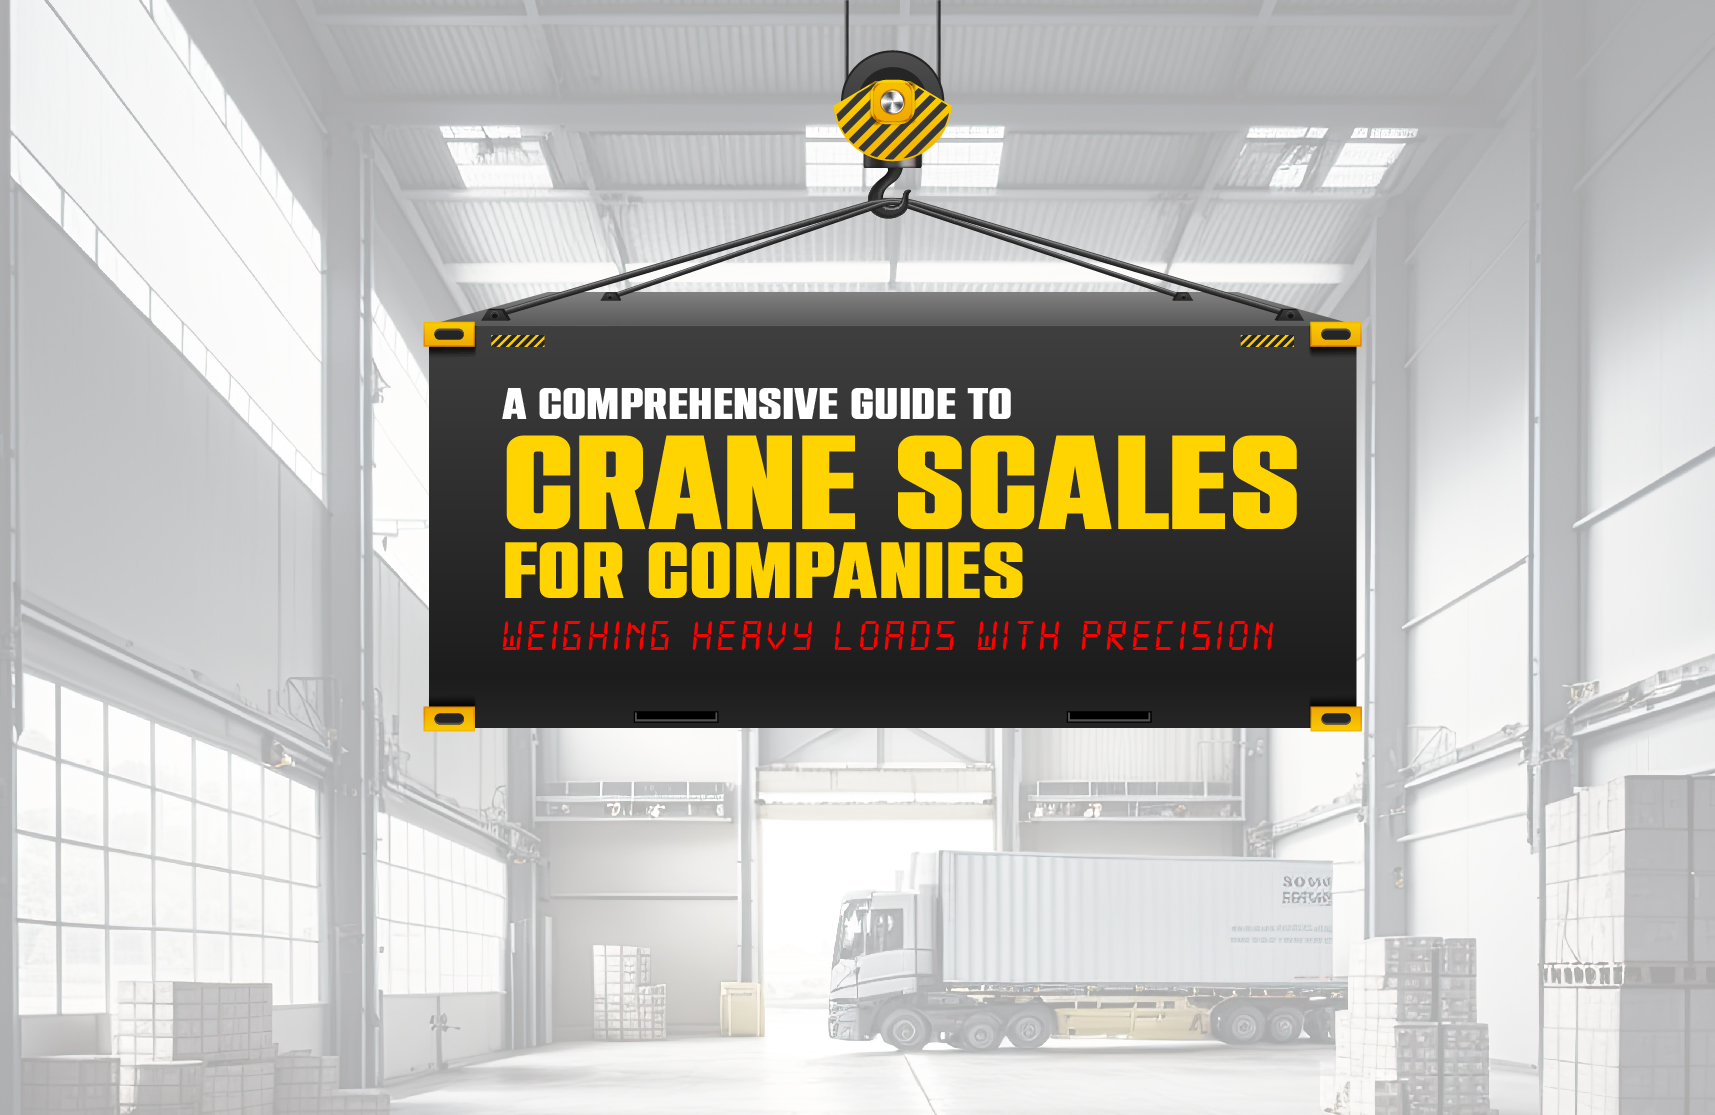 A Comprehensive Guide to Crane Scales for Companies: Weighing Heavy Loads with Precision